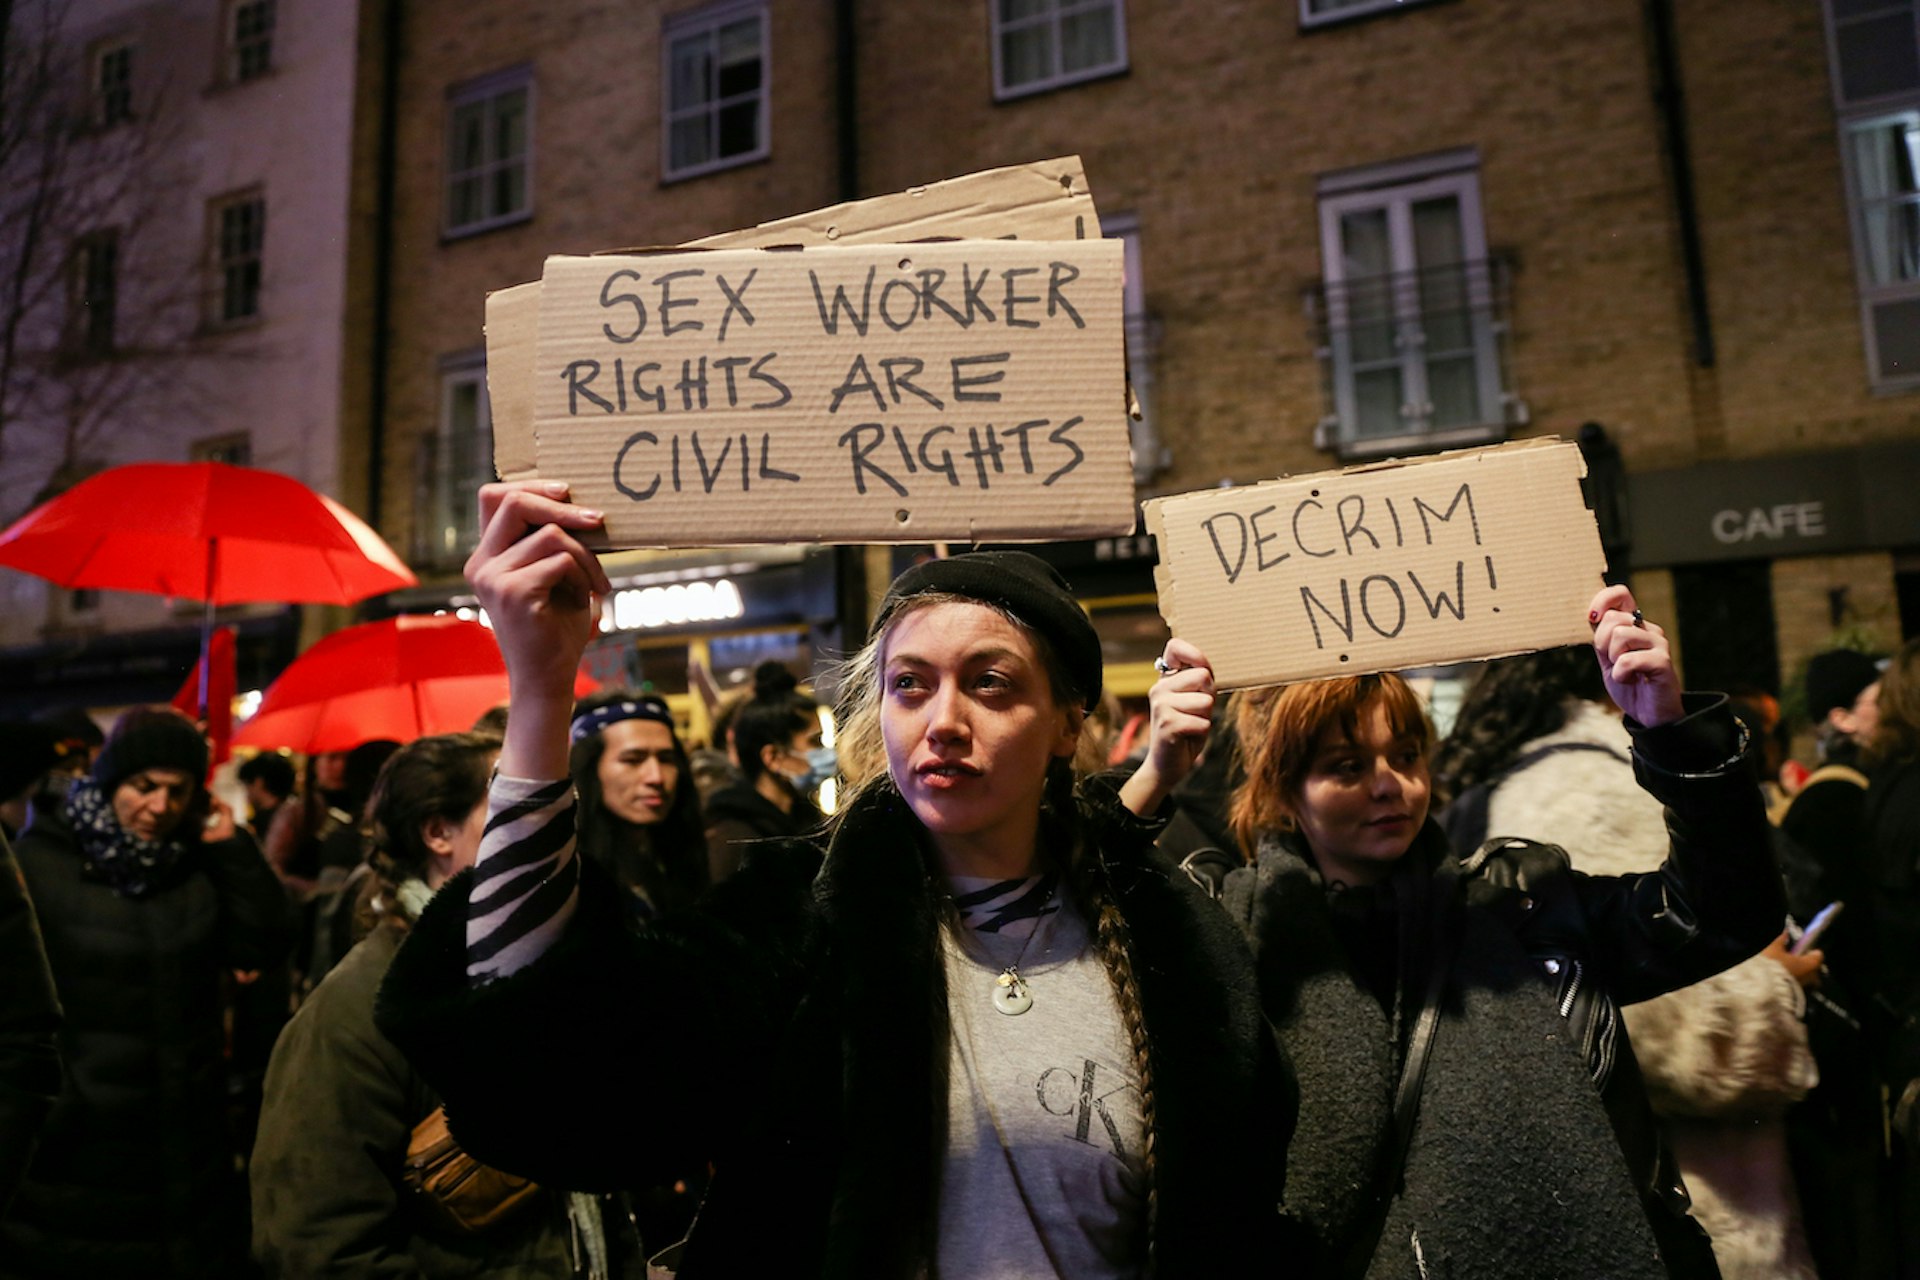 How the cost of living crisis is endangering sex workers